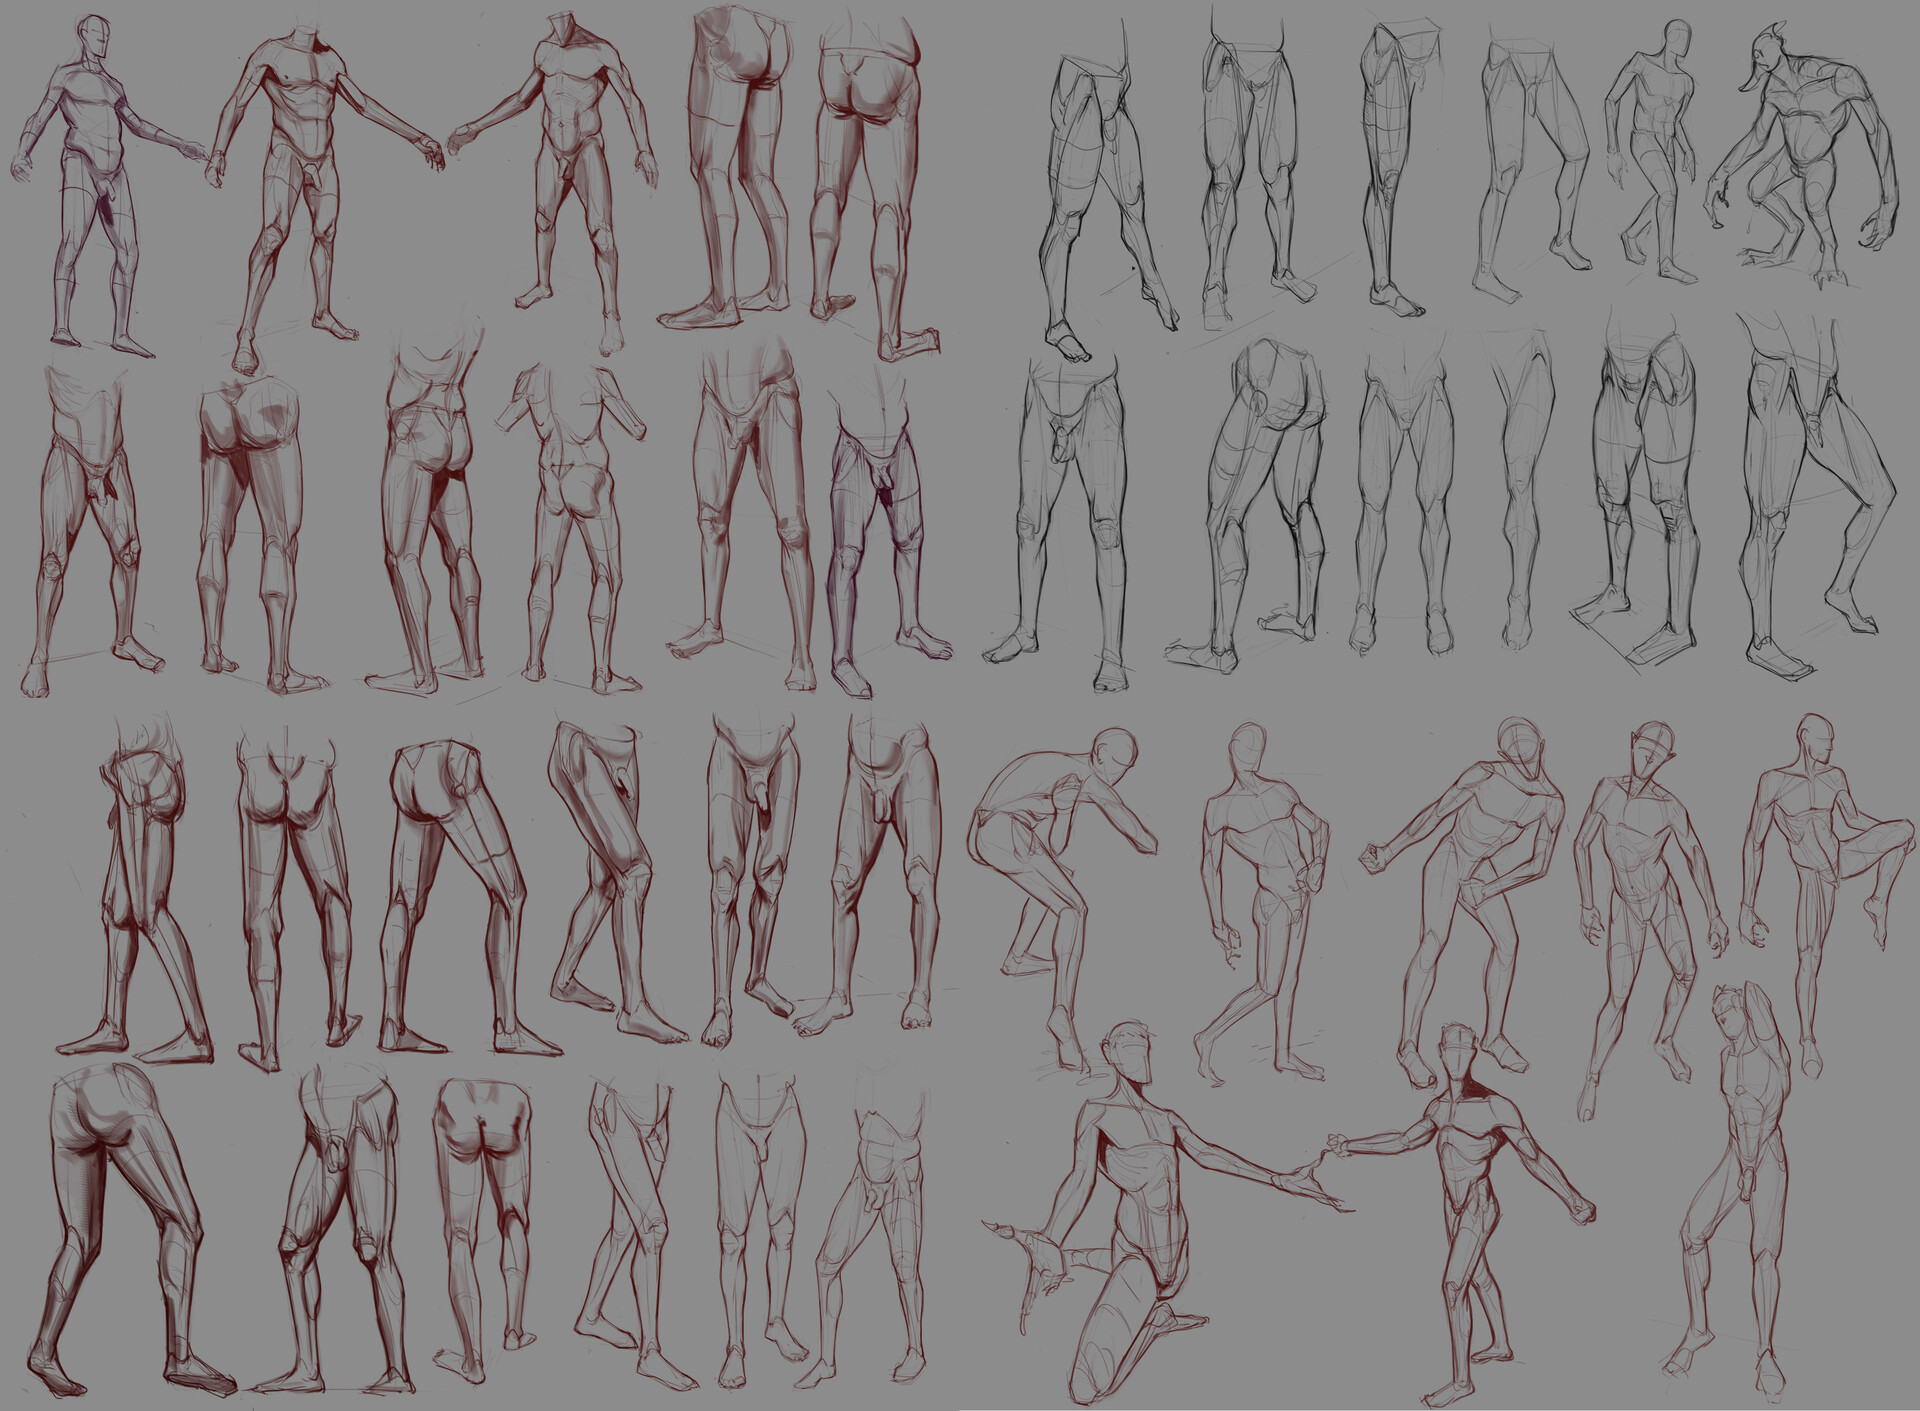 Vick Gaza - 2D Studies and Drawing - Human Anatomy and Body Structure